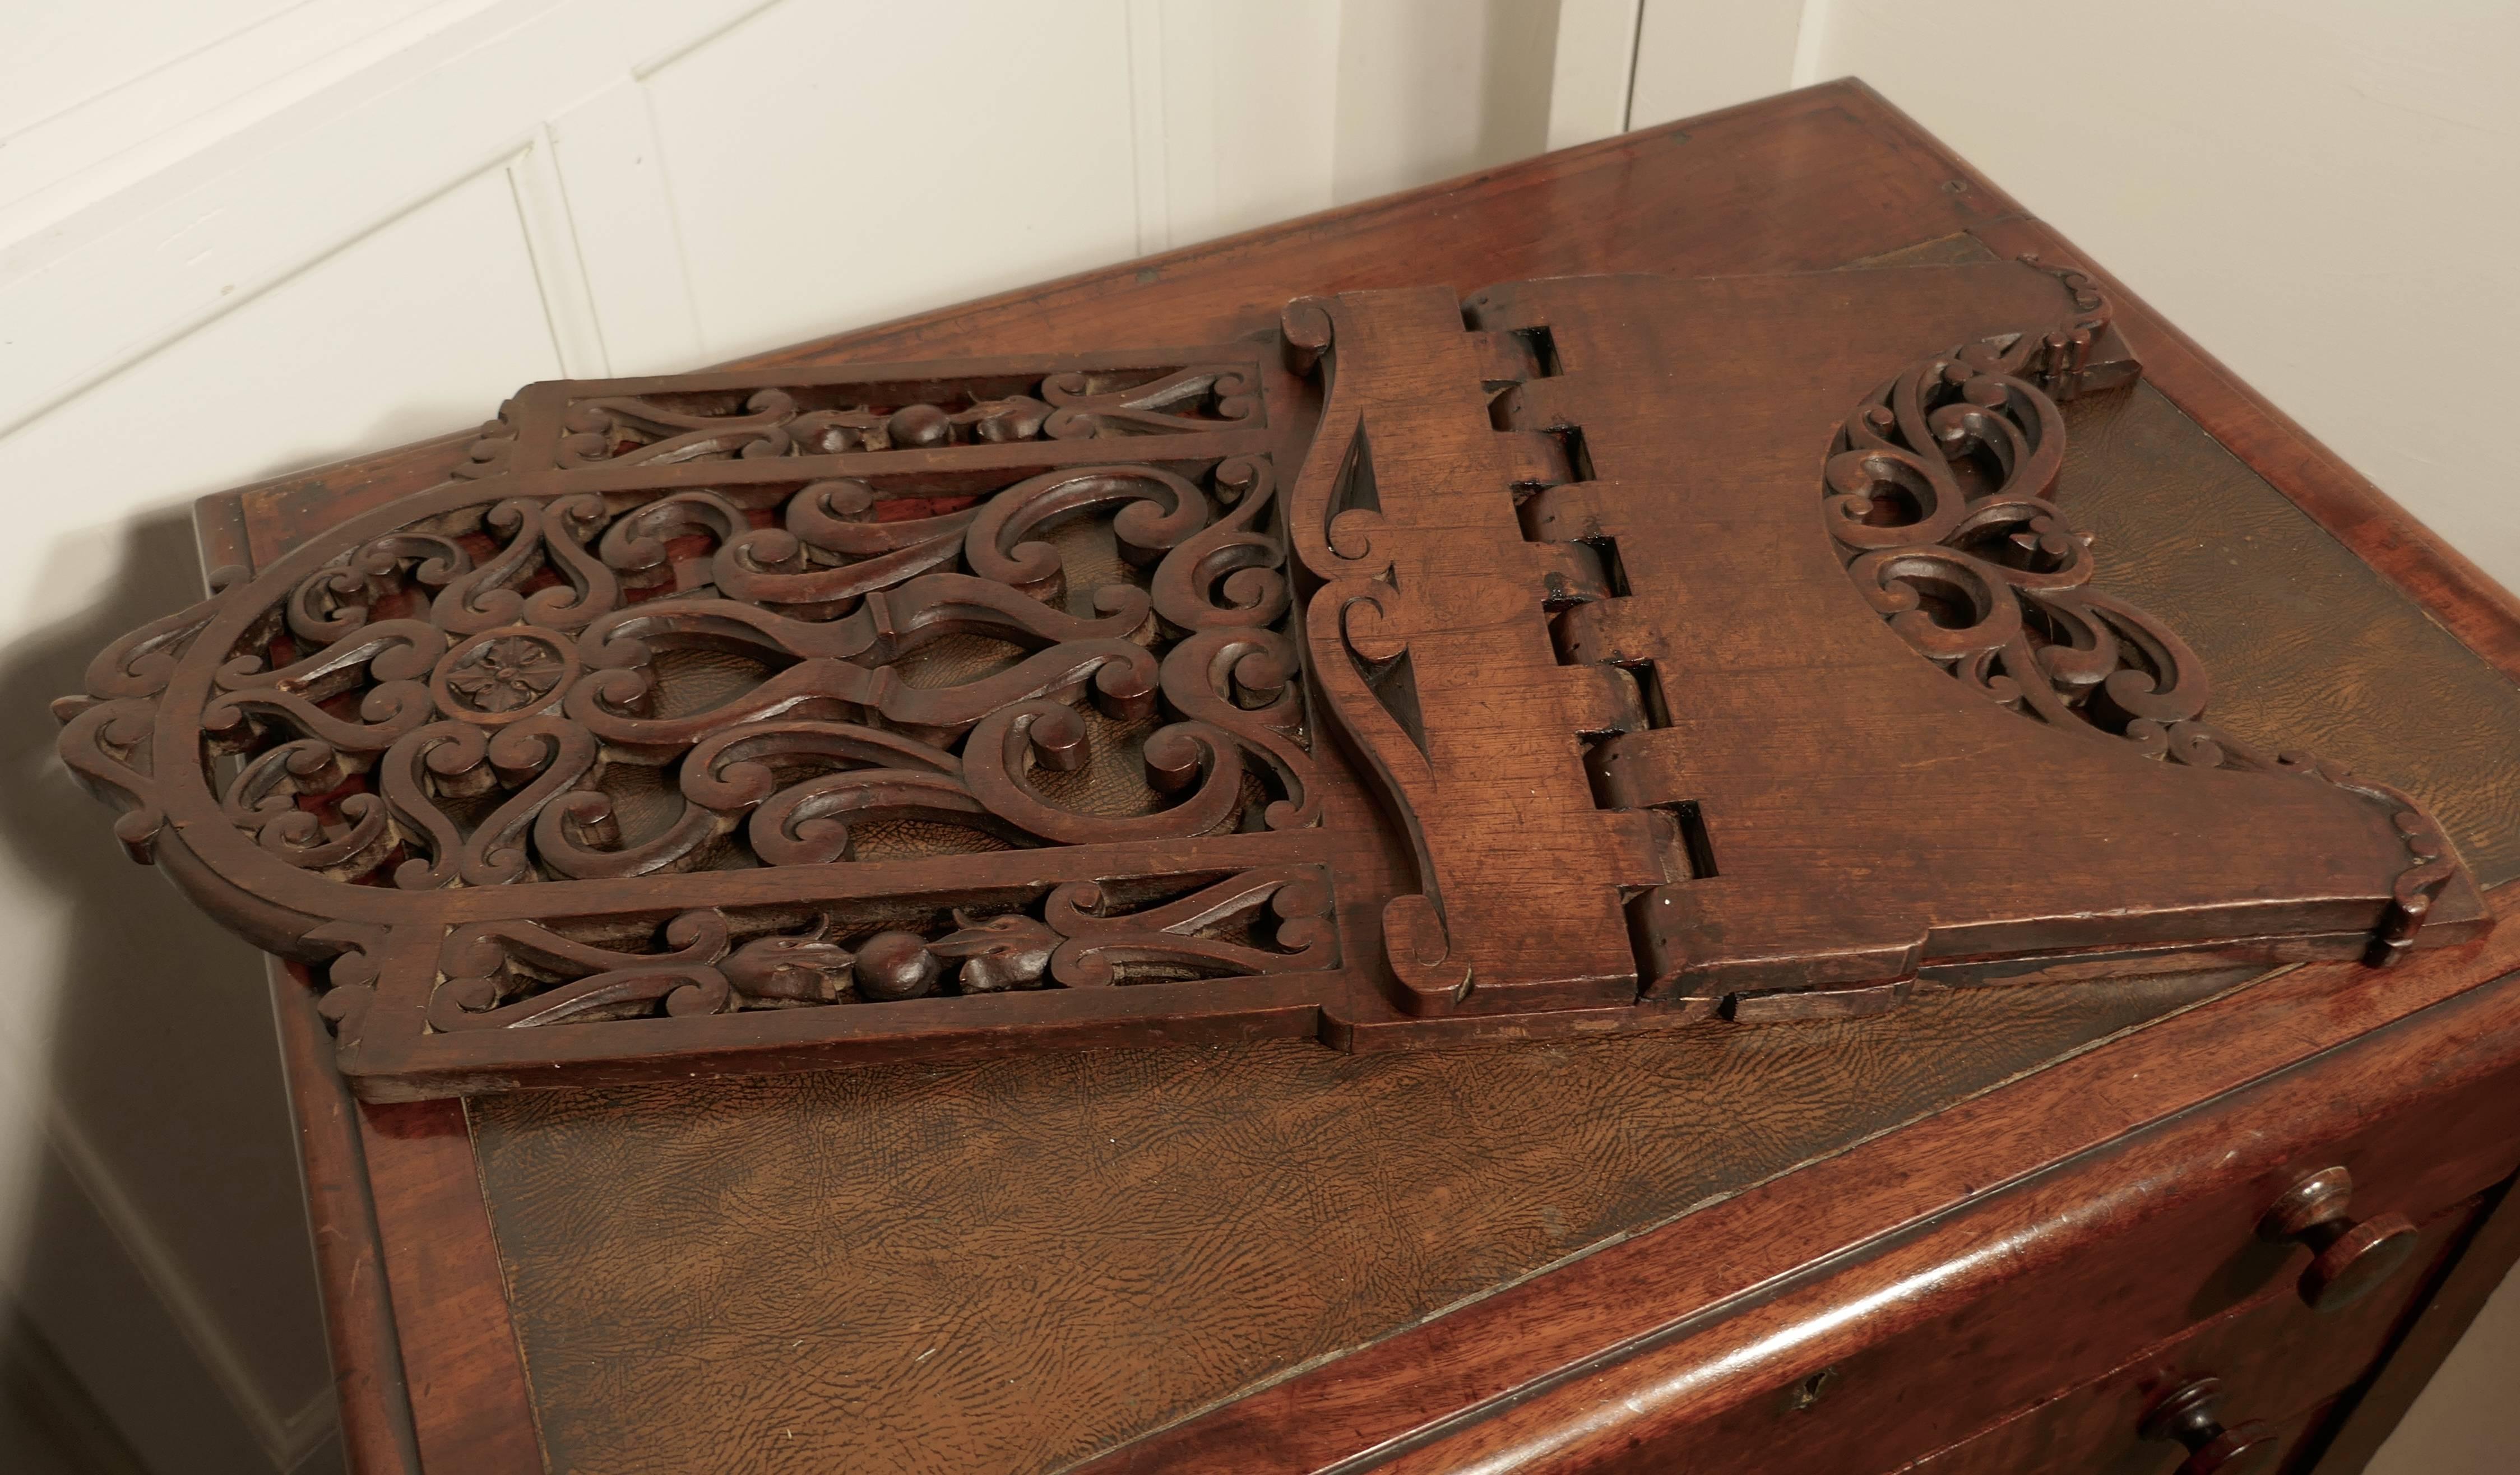 Very large French Arts & Crafts book rest, Ecclesiastical reading stand, Lutrin

This is a charming piece, known in France as a Lutrin, it came from a presbytery, this one has a lot of carved and pierced decoration 

The stand has been superbly